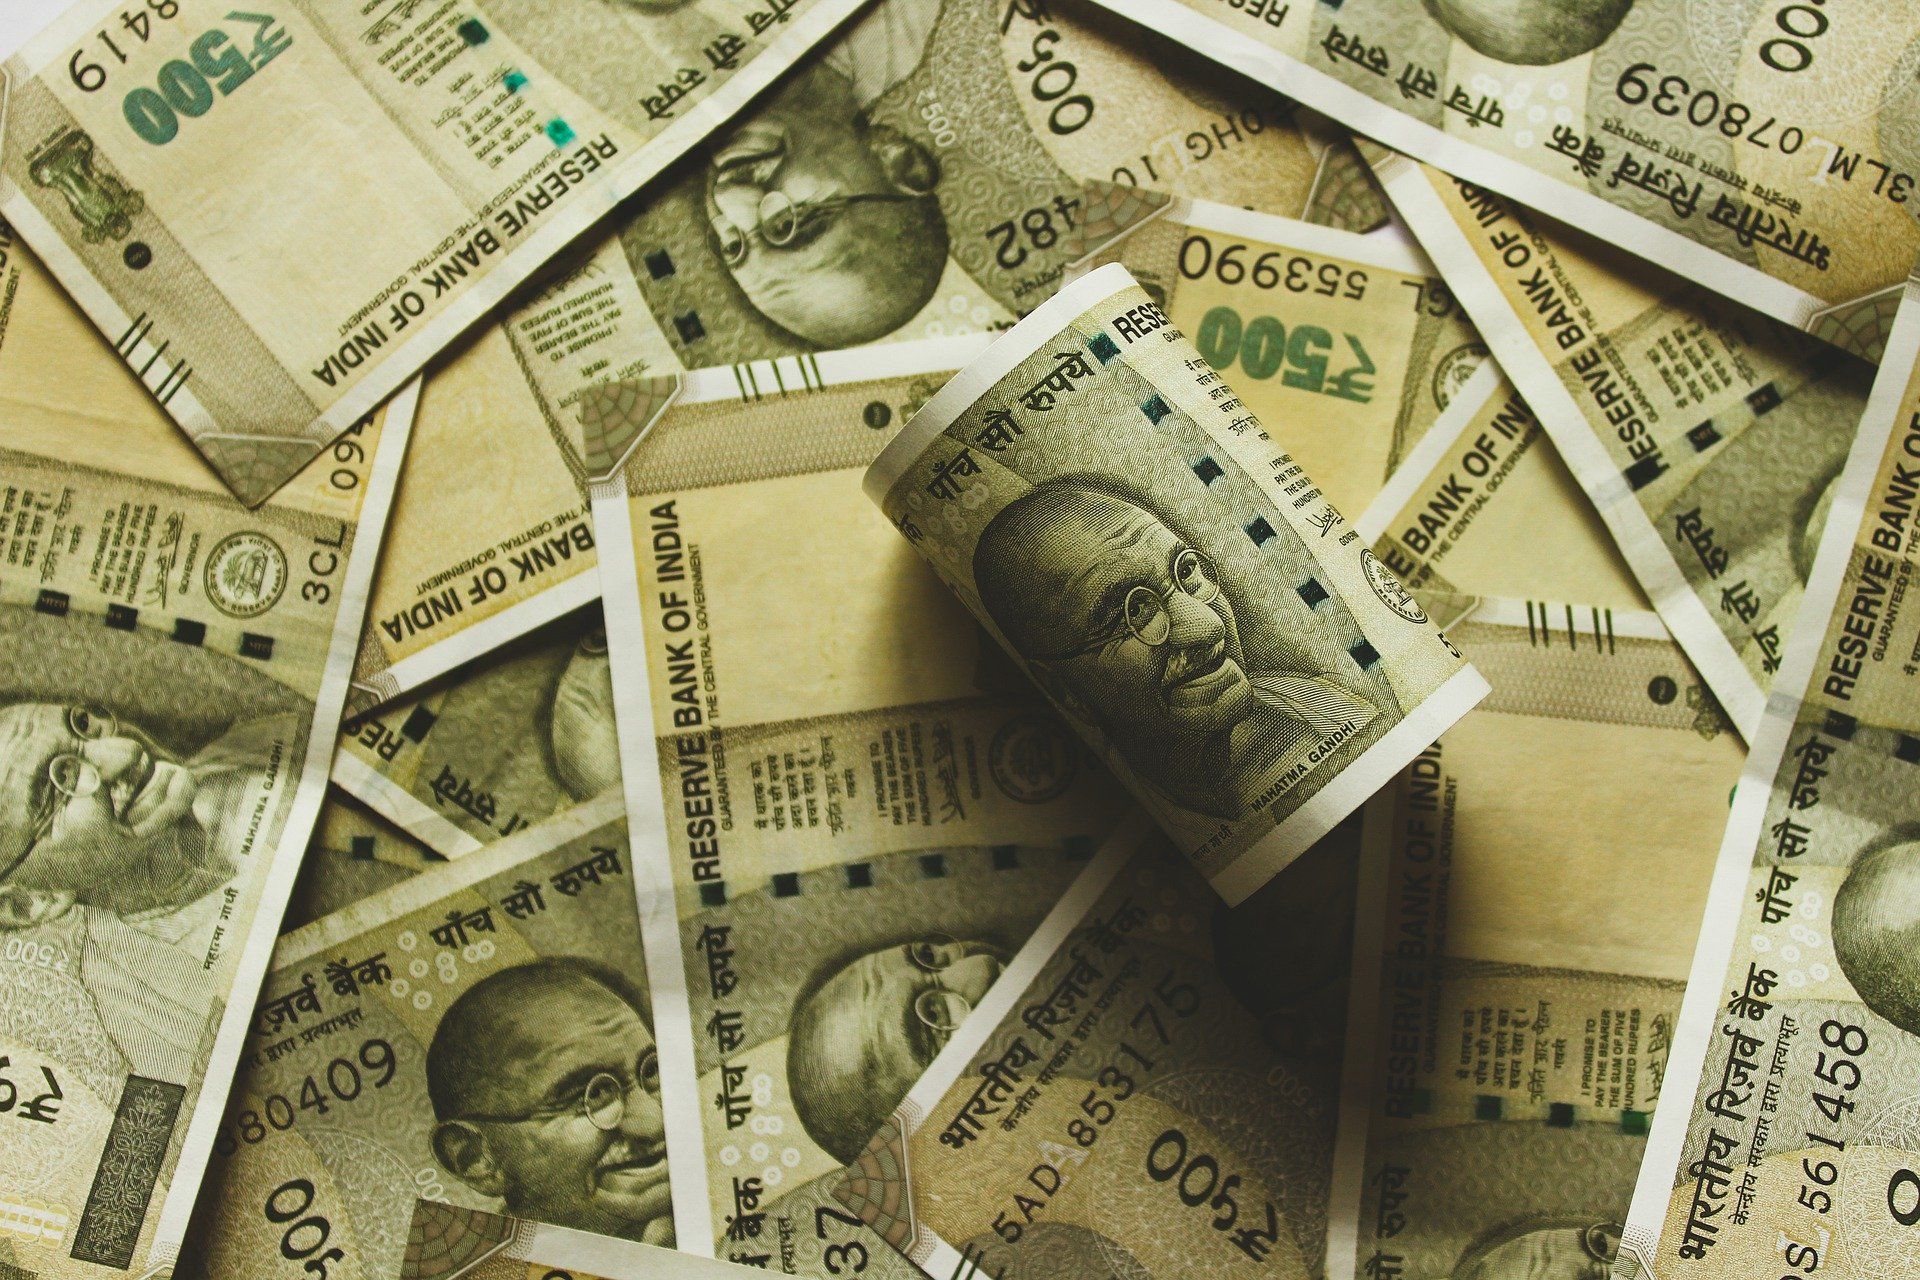 FPIs withdrew Rs 18,856 crore from Indian markets in February so far